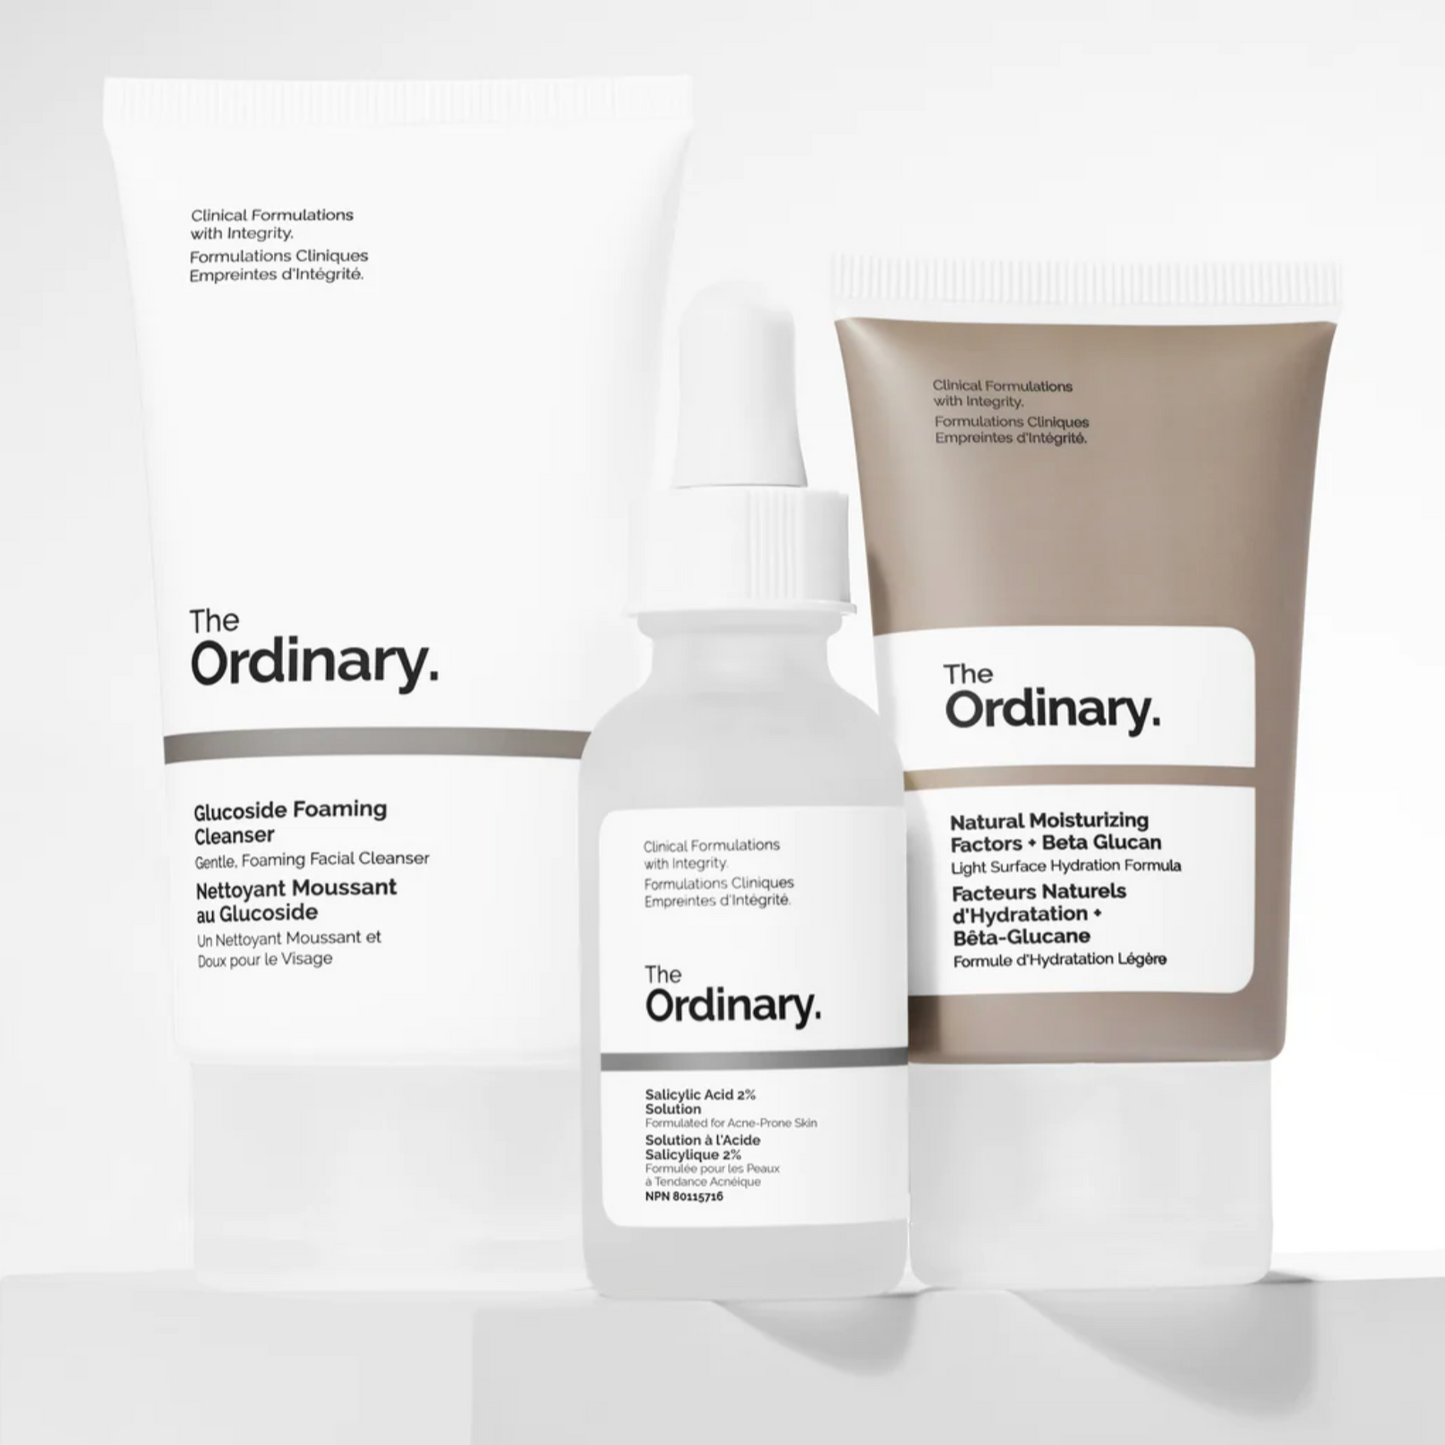 The Ordinary Acne 3-Pack TrendSets Bundle